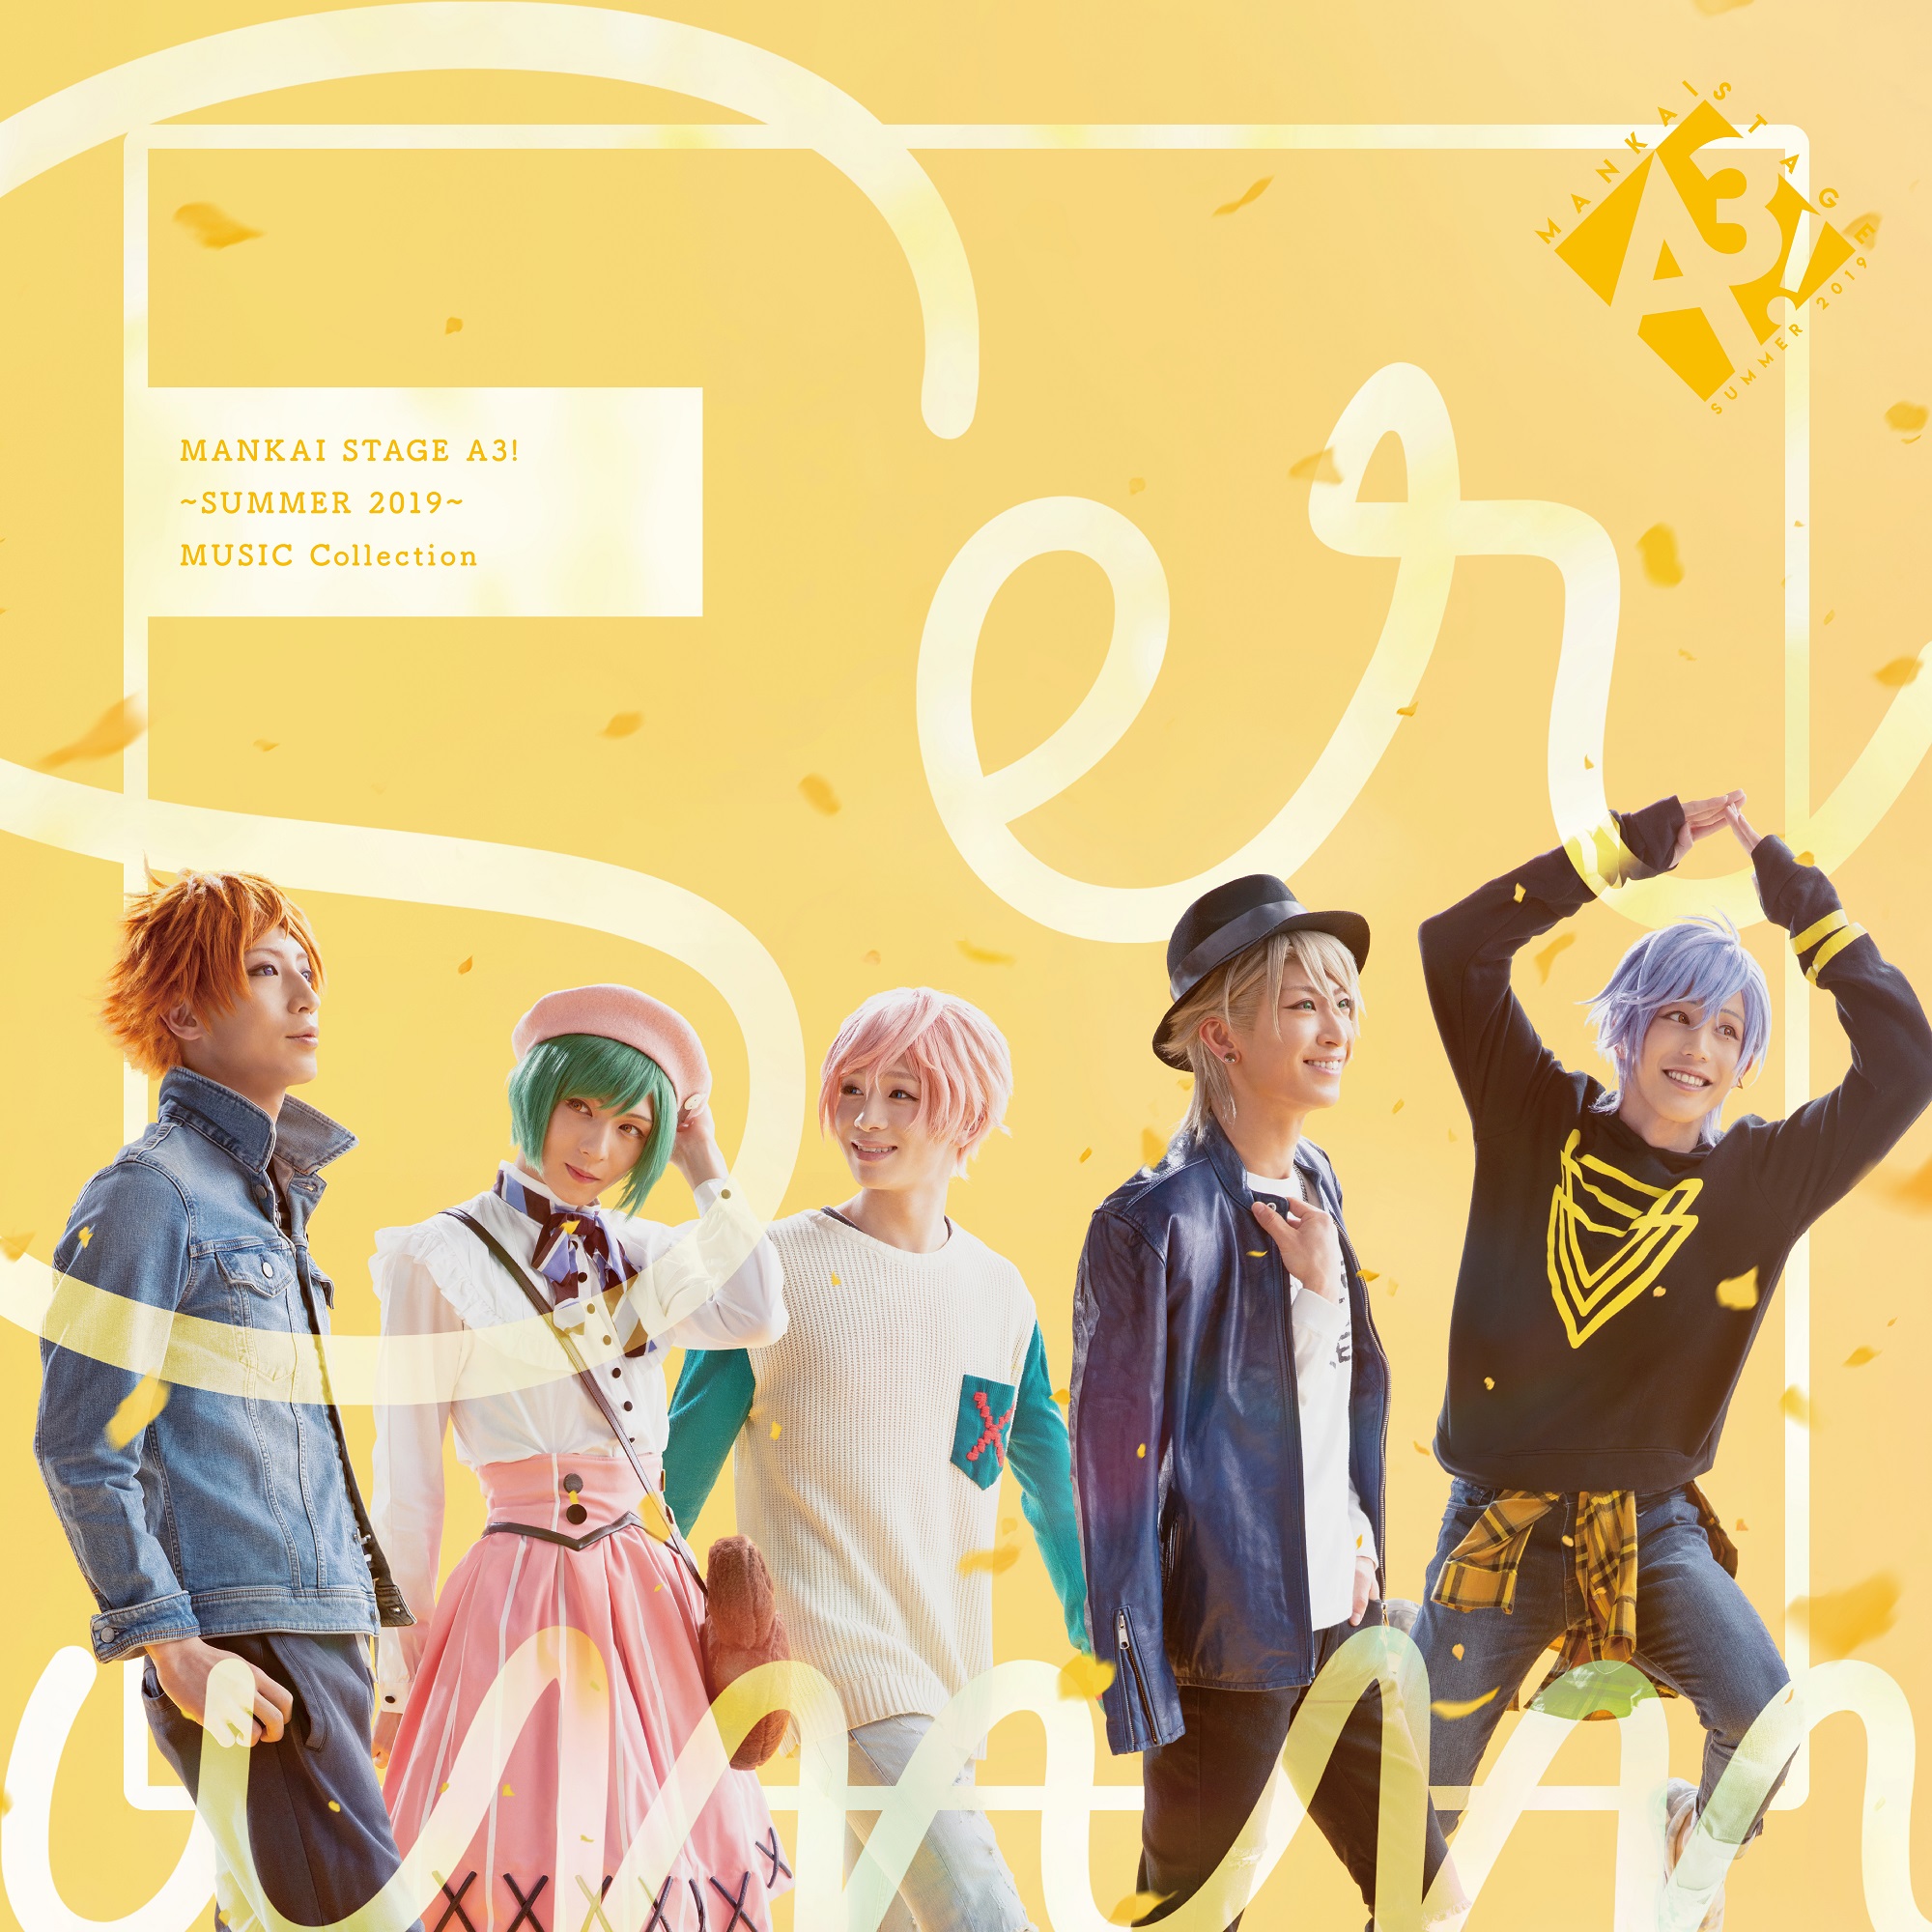 【MANKAI STAGE A3!】MANKAI STAGE”A3!”〜SUMMER 2019〜 MUSIC Collection(CD only)